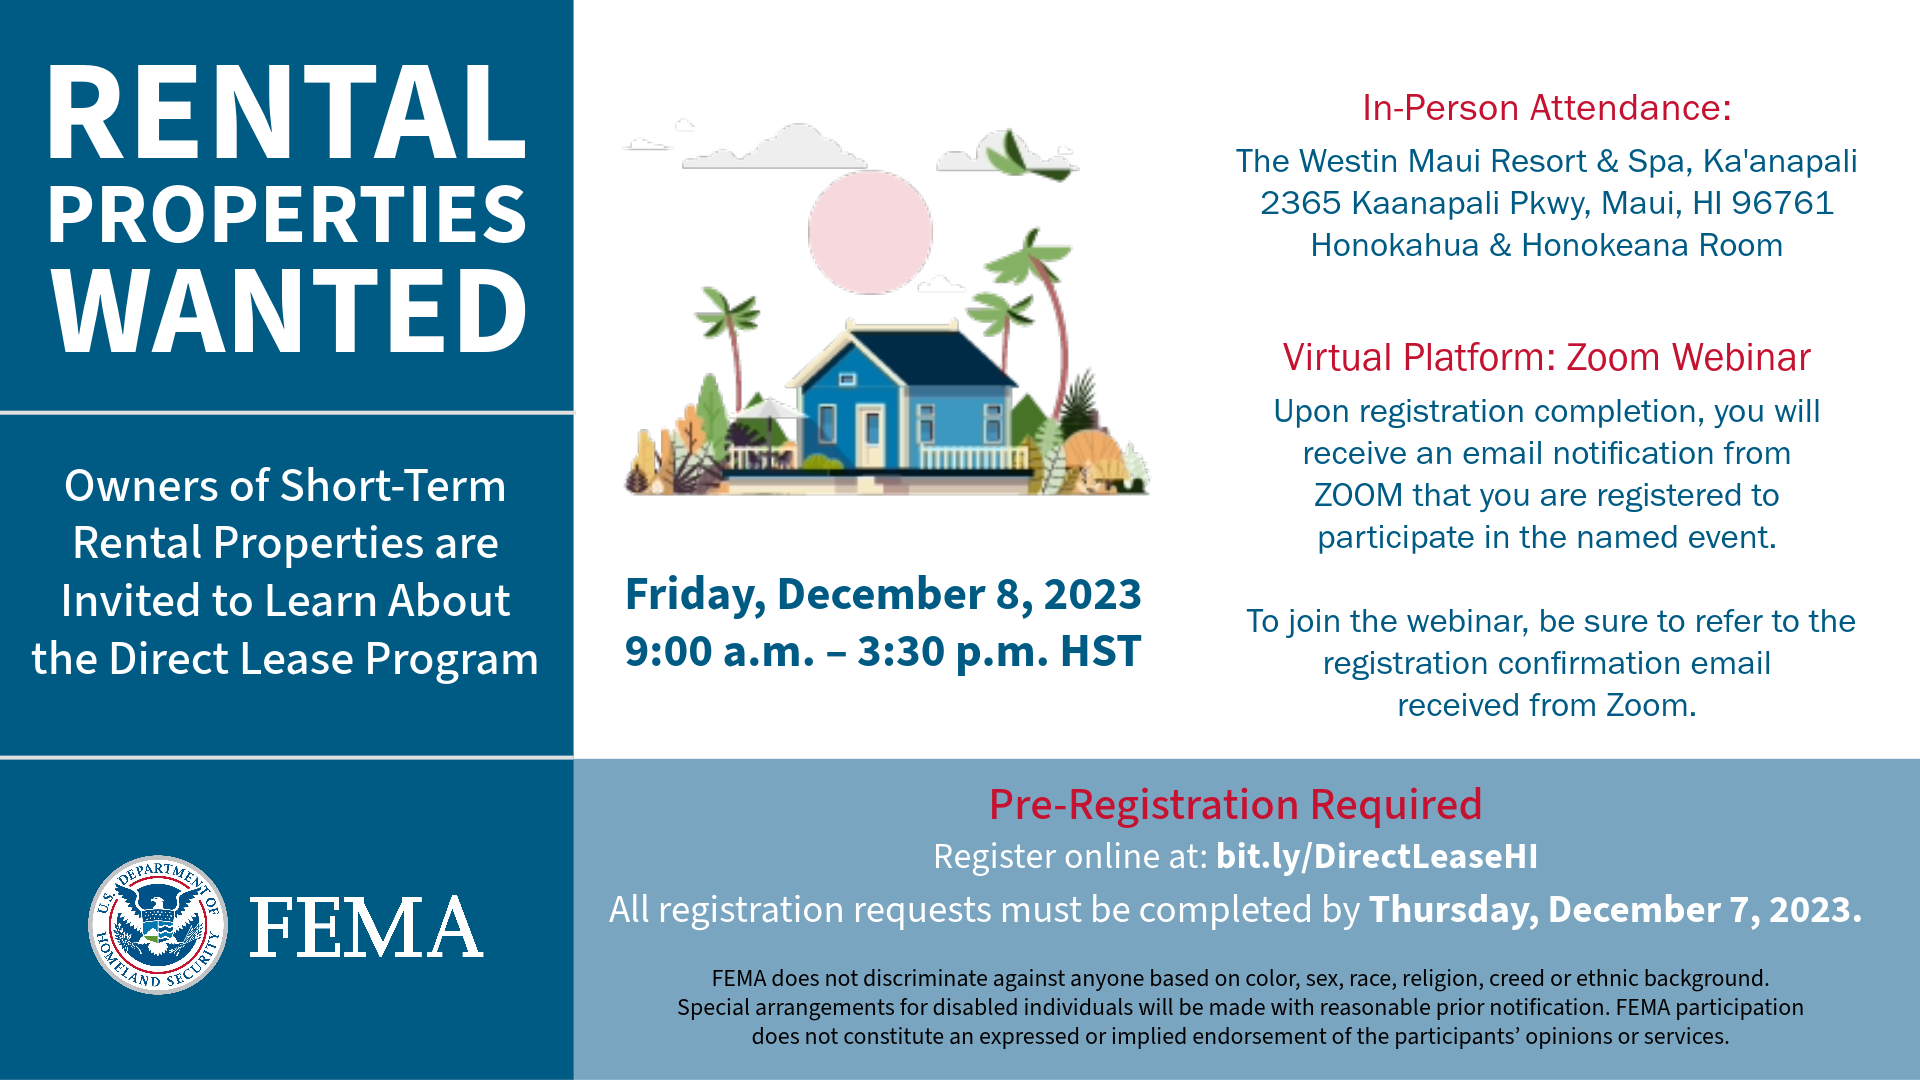 RENTAL PROPERTIES WANTED Owners of Short-Term Rental Properties are Invited to Learn About the Direct Lease Program Thursday, December 21, 2023 9:00 a.m. – 3:30 p.m. HST